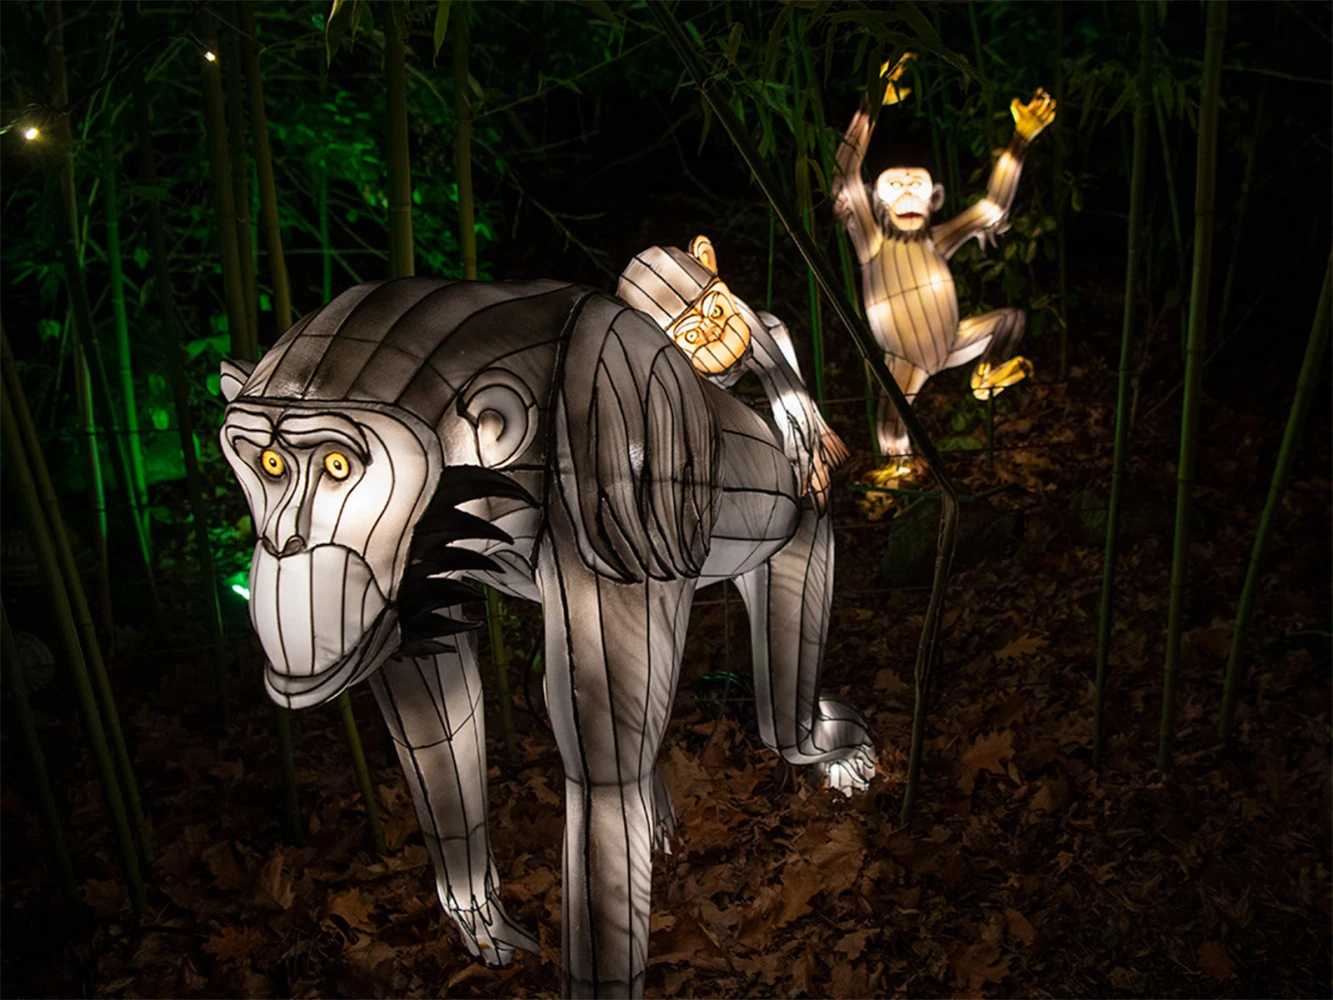 Bronx Zoo Holiday Lights: What to expect - 4